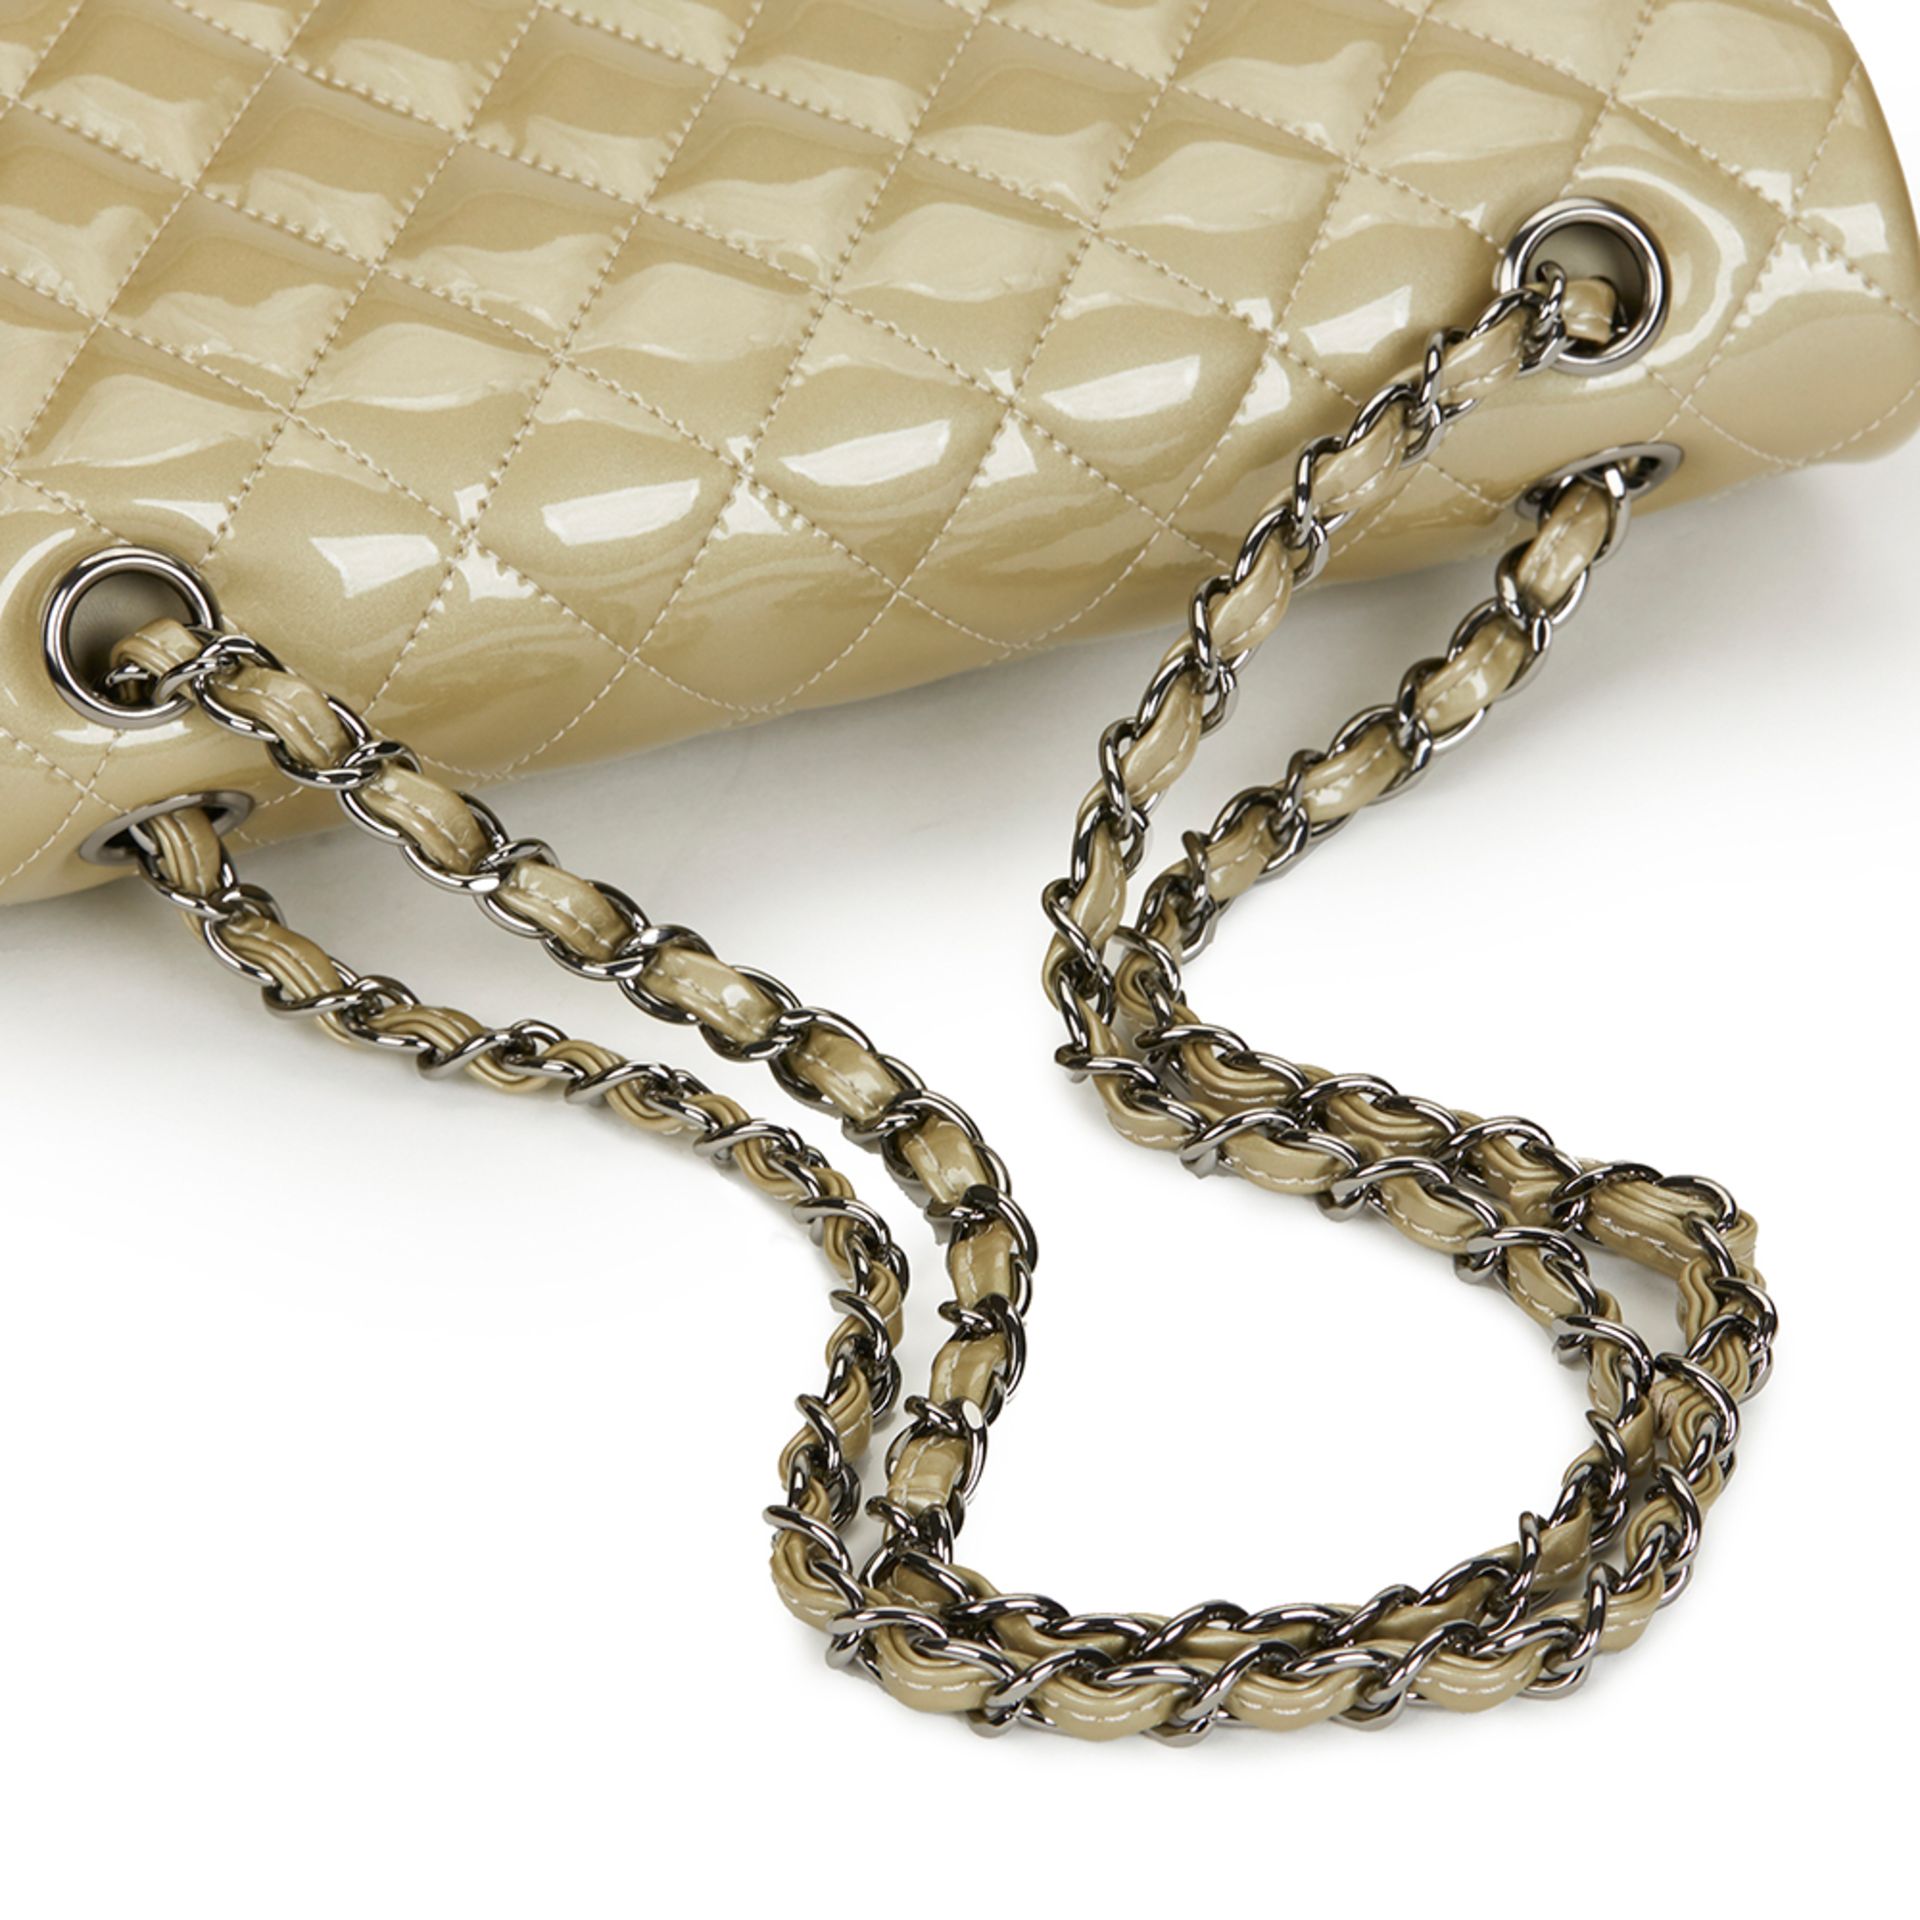 Pale Olive Quilted Iridescent Patent Leather Medium Classic Double Flap Bag - Image 7 of 10